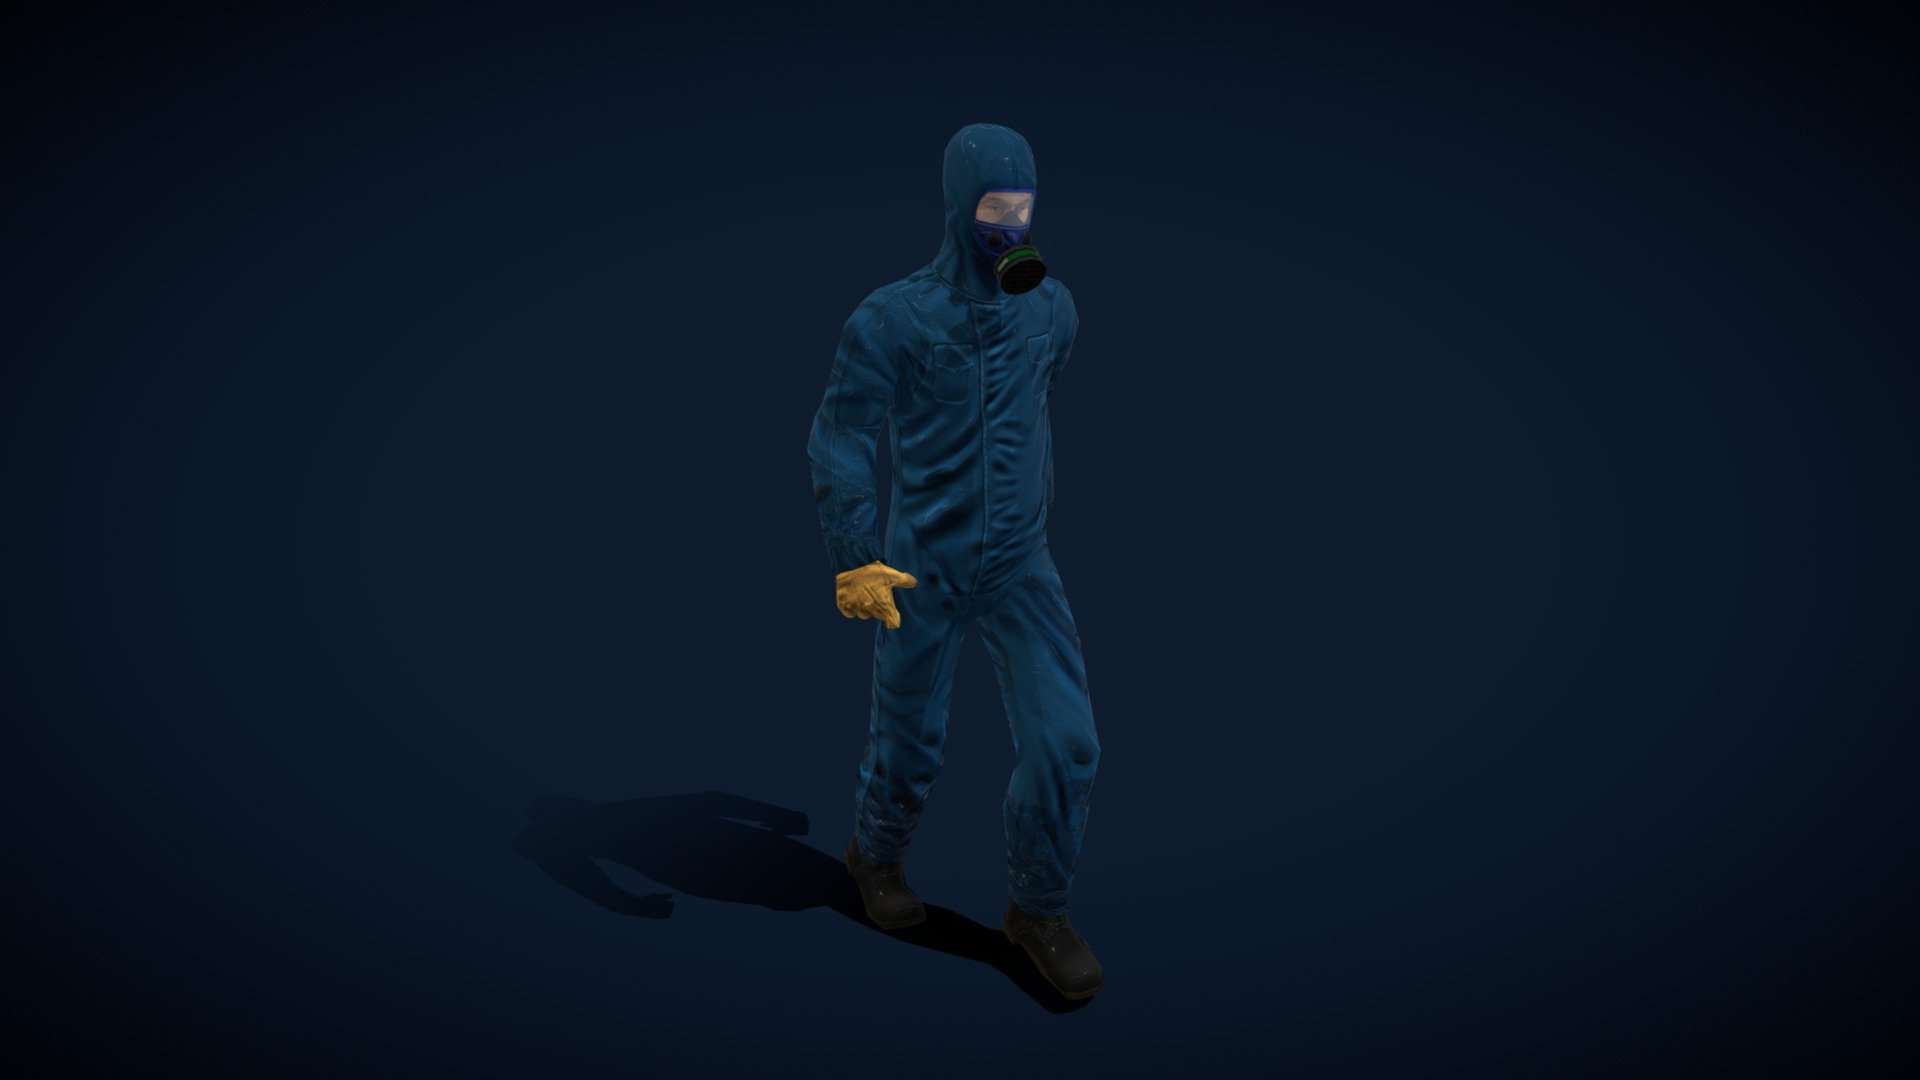 Model Character 3D
HIGHEST QUALITY
VR Game Ready Low Poly Safety Worker
Current Hard Blue Clothing.
Vented Safety helmet. All created from 3D Scans.

suitable for Simulations or Game Format
Exports to Unity/Unreal

....... MESH ............
2354 polys/4530 Tris

------ANIMATION----------
walk :0-34 (frame)

------TEXTURES----------
5 x Textures - TGA (DIFFUSE, NORMAL, SPEC,OPAC)
1024/1024 - V5 Smock Man - Buy Royalty Free 3D model by V5 (@sakurav) 3d model